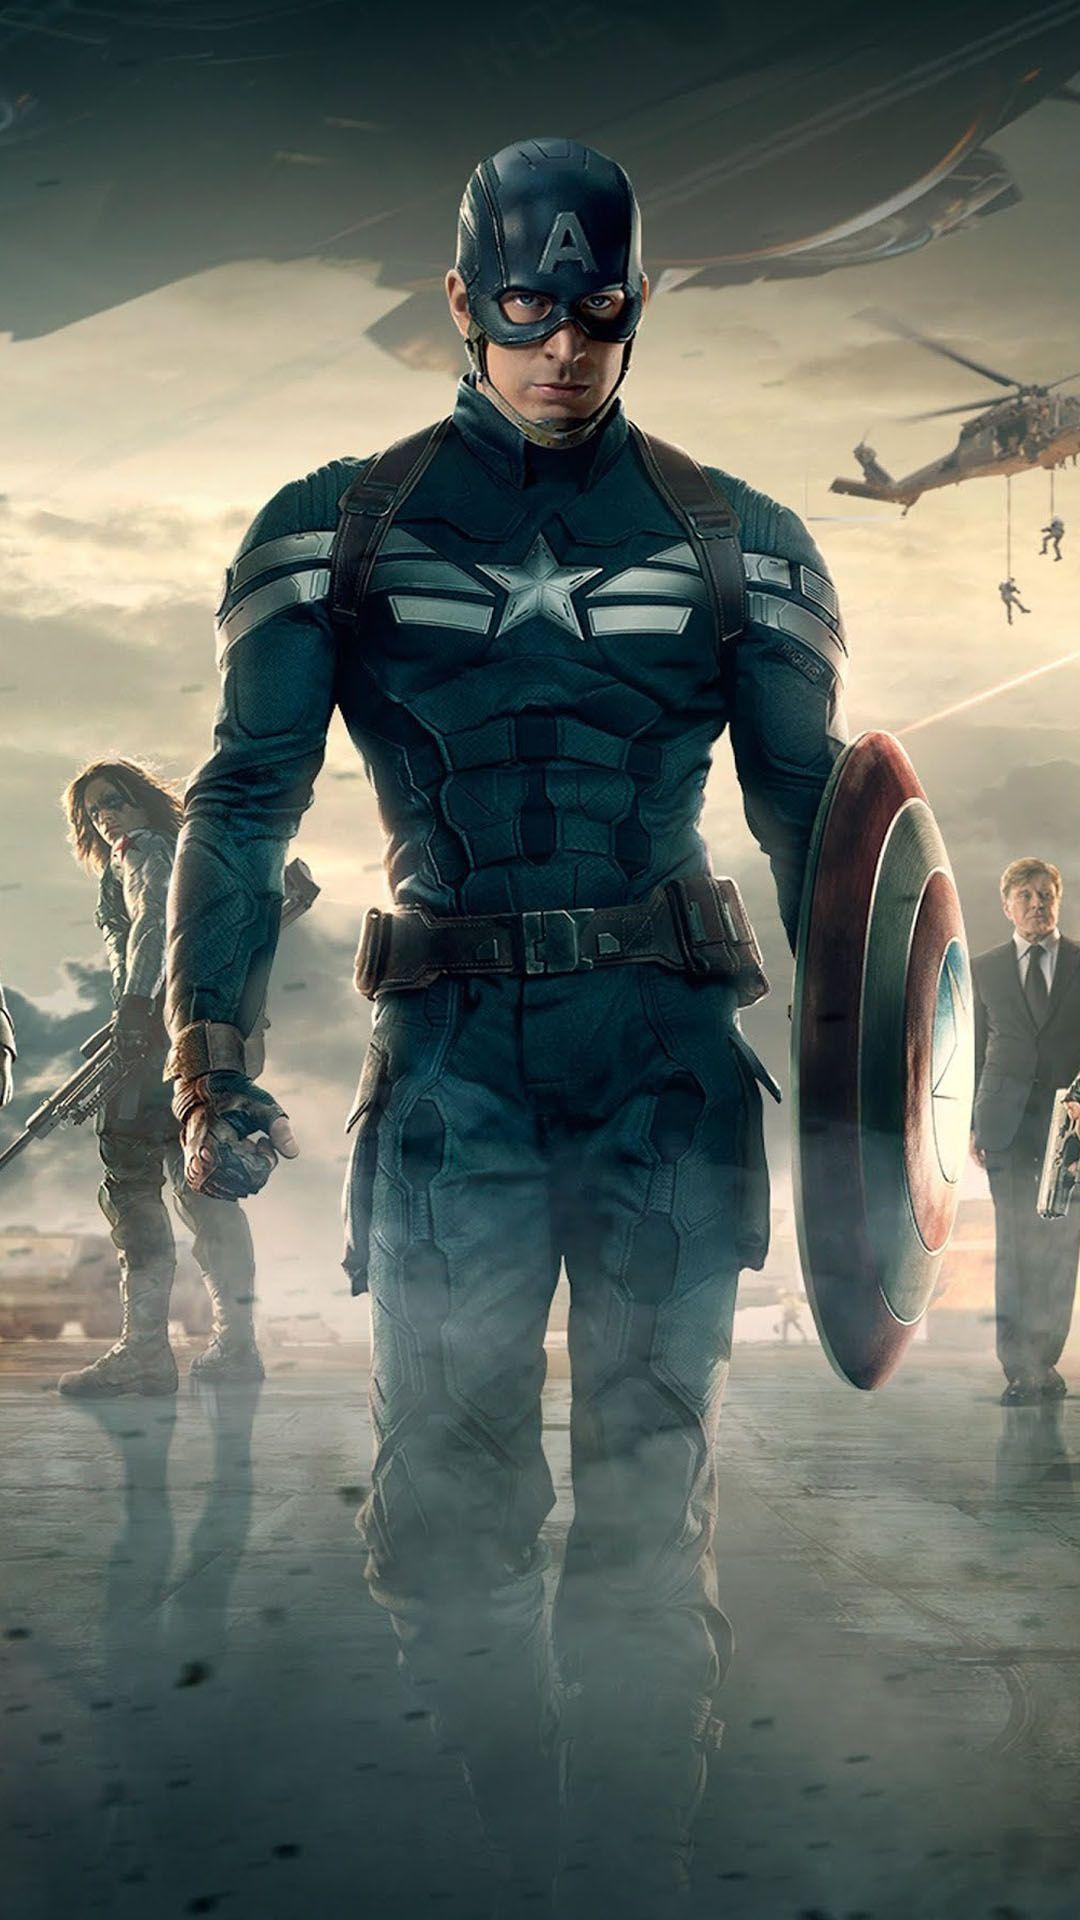 Captain America 2 The Winter Soldier. HTC One wallpaper